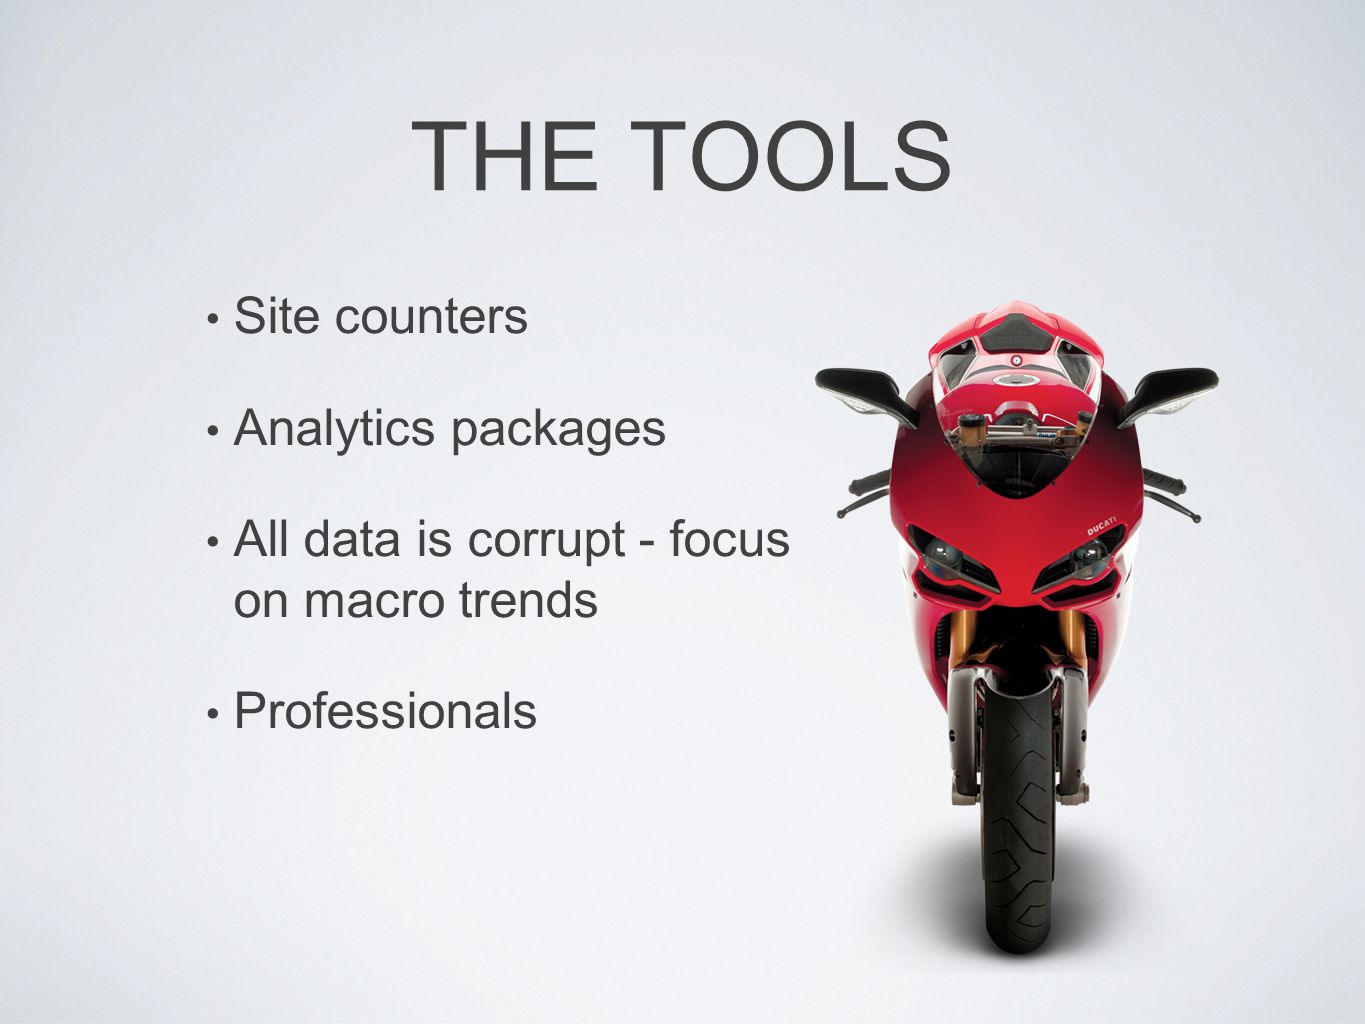 THE TOOLS Site counters Analytics packages All data is corrupt - focus on macro trends Professionals